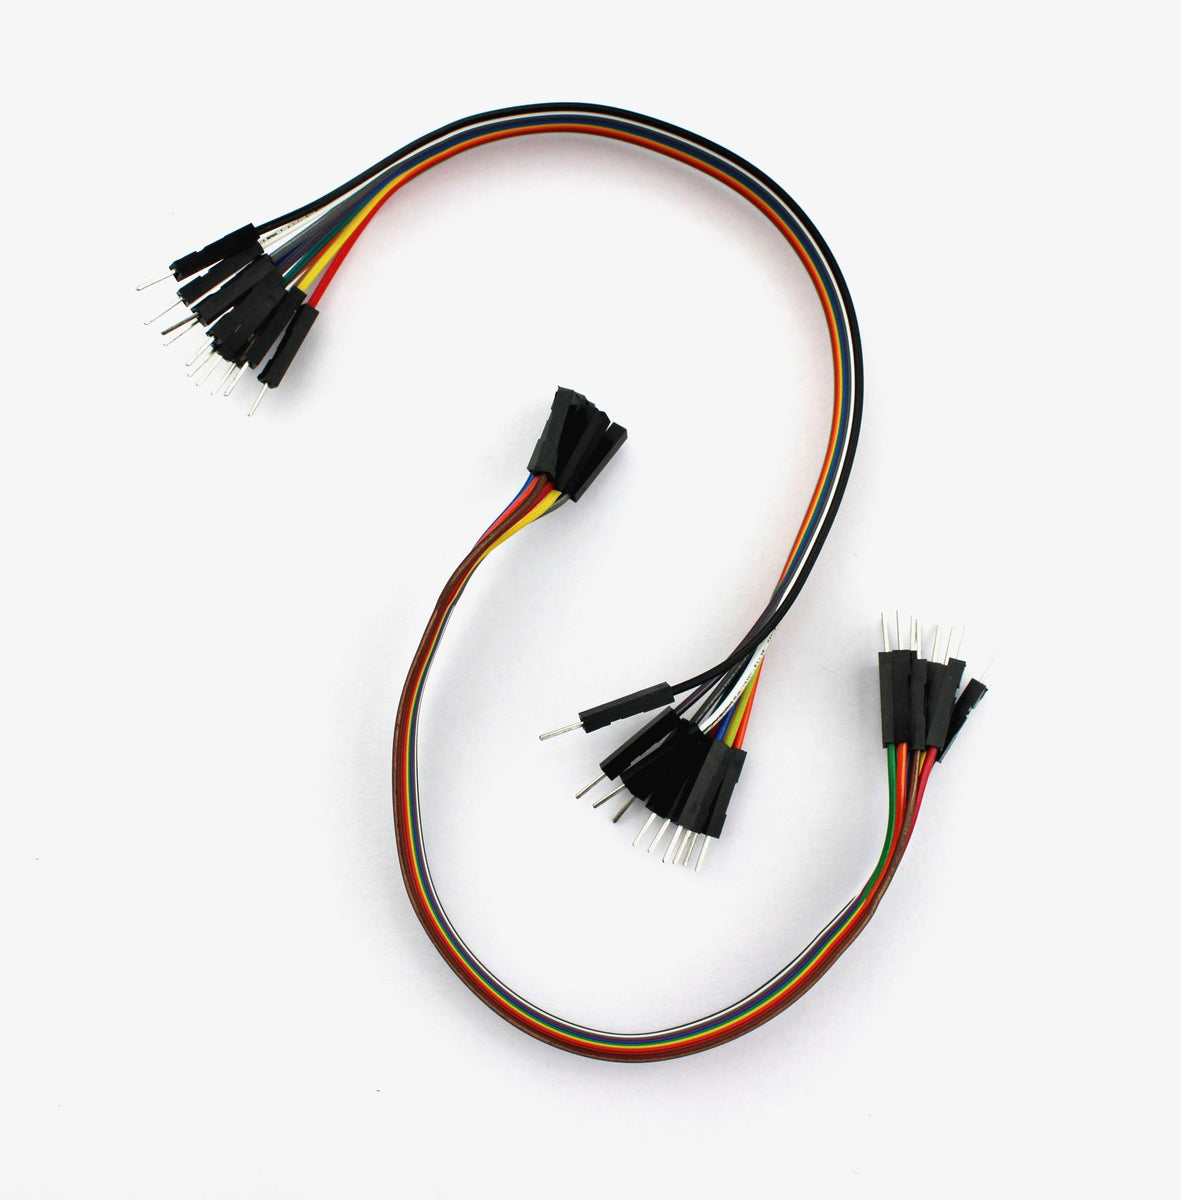 23AWG Single Strand Breadboard Connecting Wire (Black and Red - 1+1 Meter)